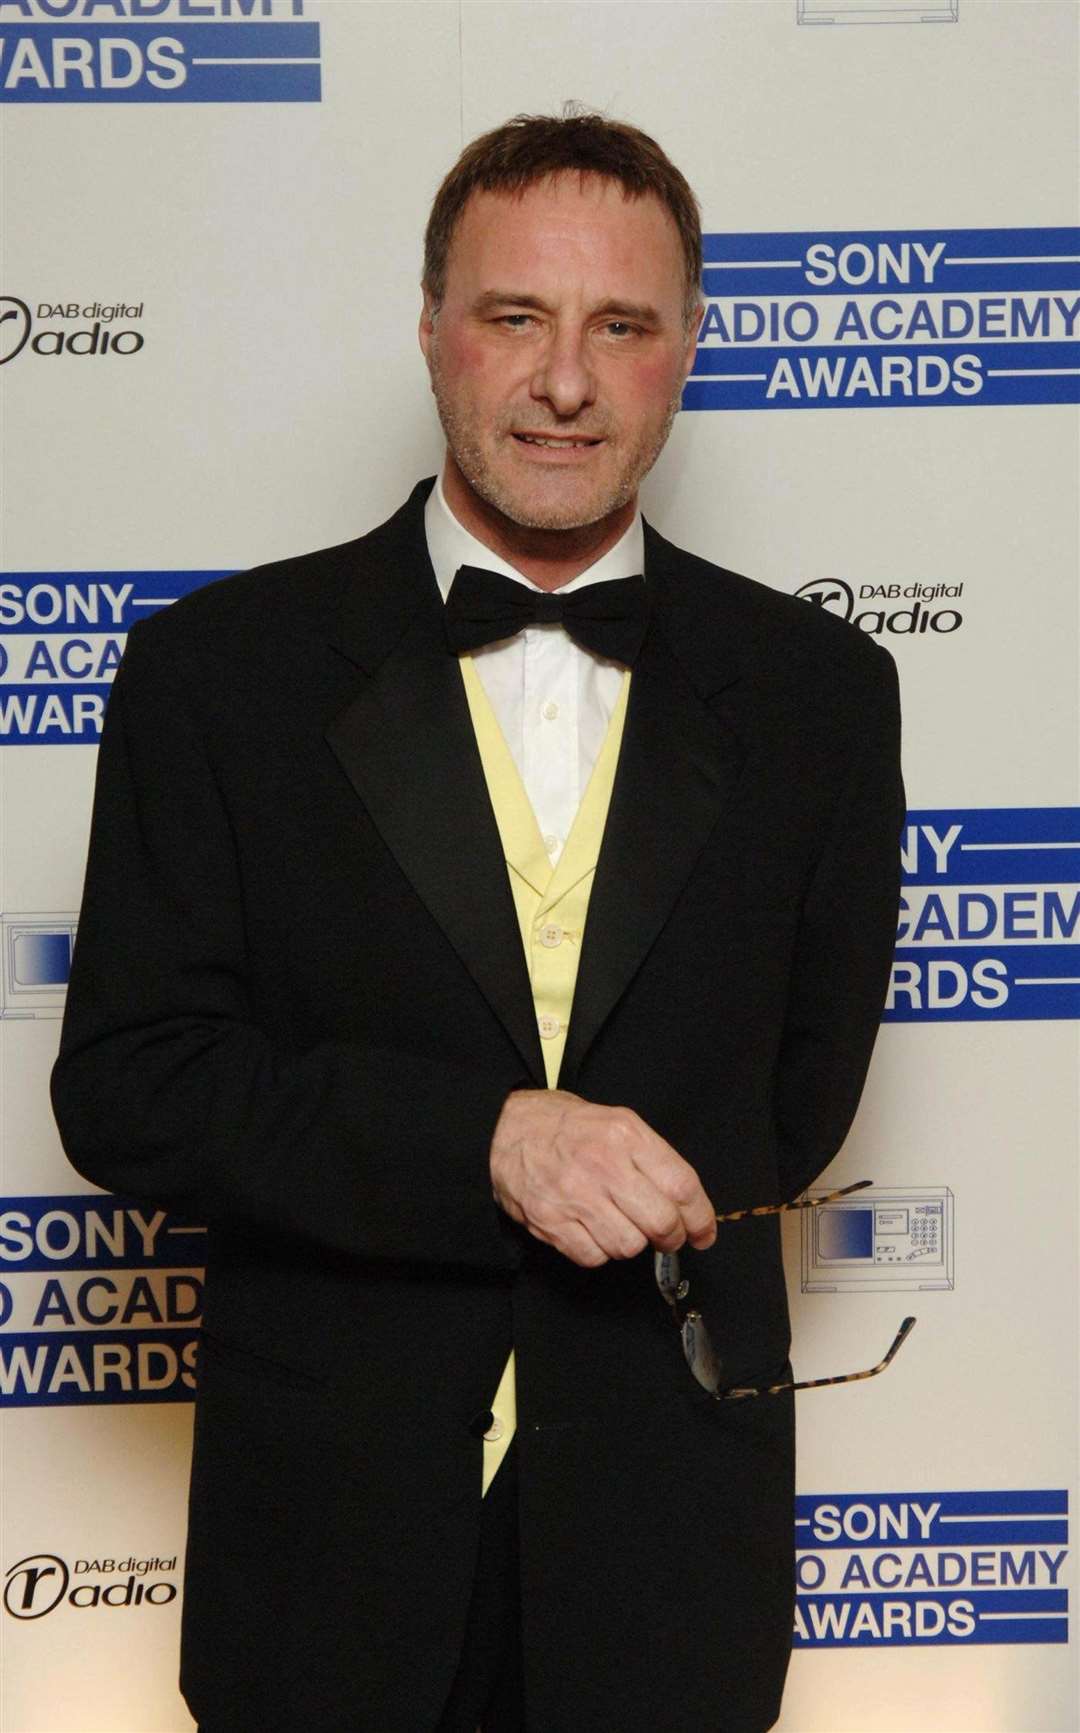 Steve Harley attended the Sony Radio Academy Awards in London in 2006 (Ian West/PA)